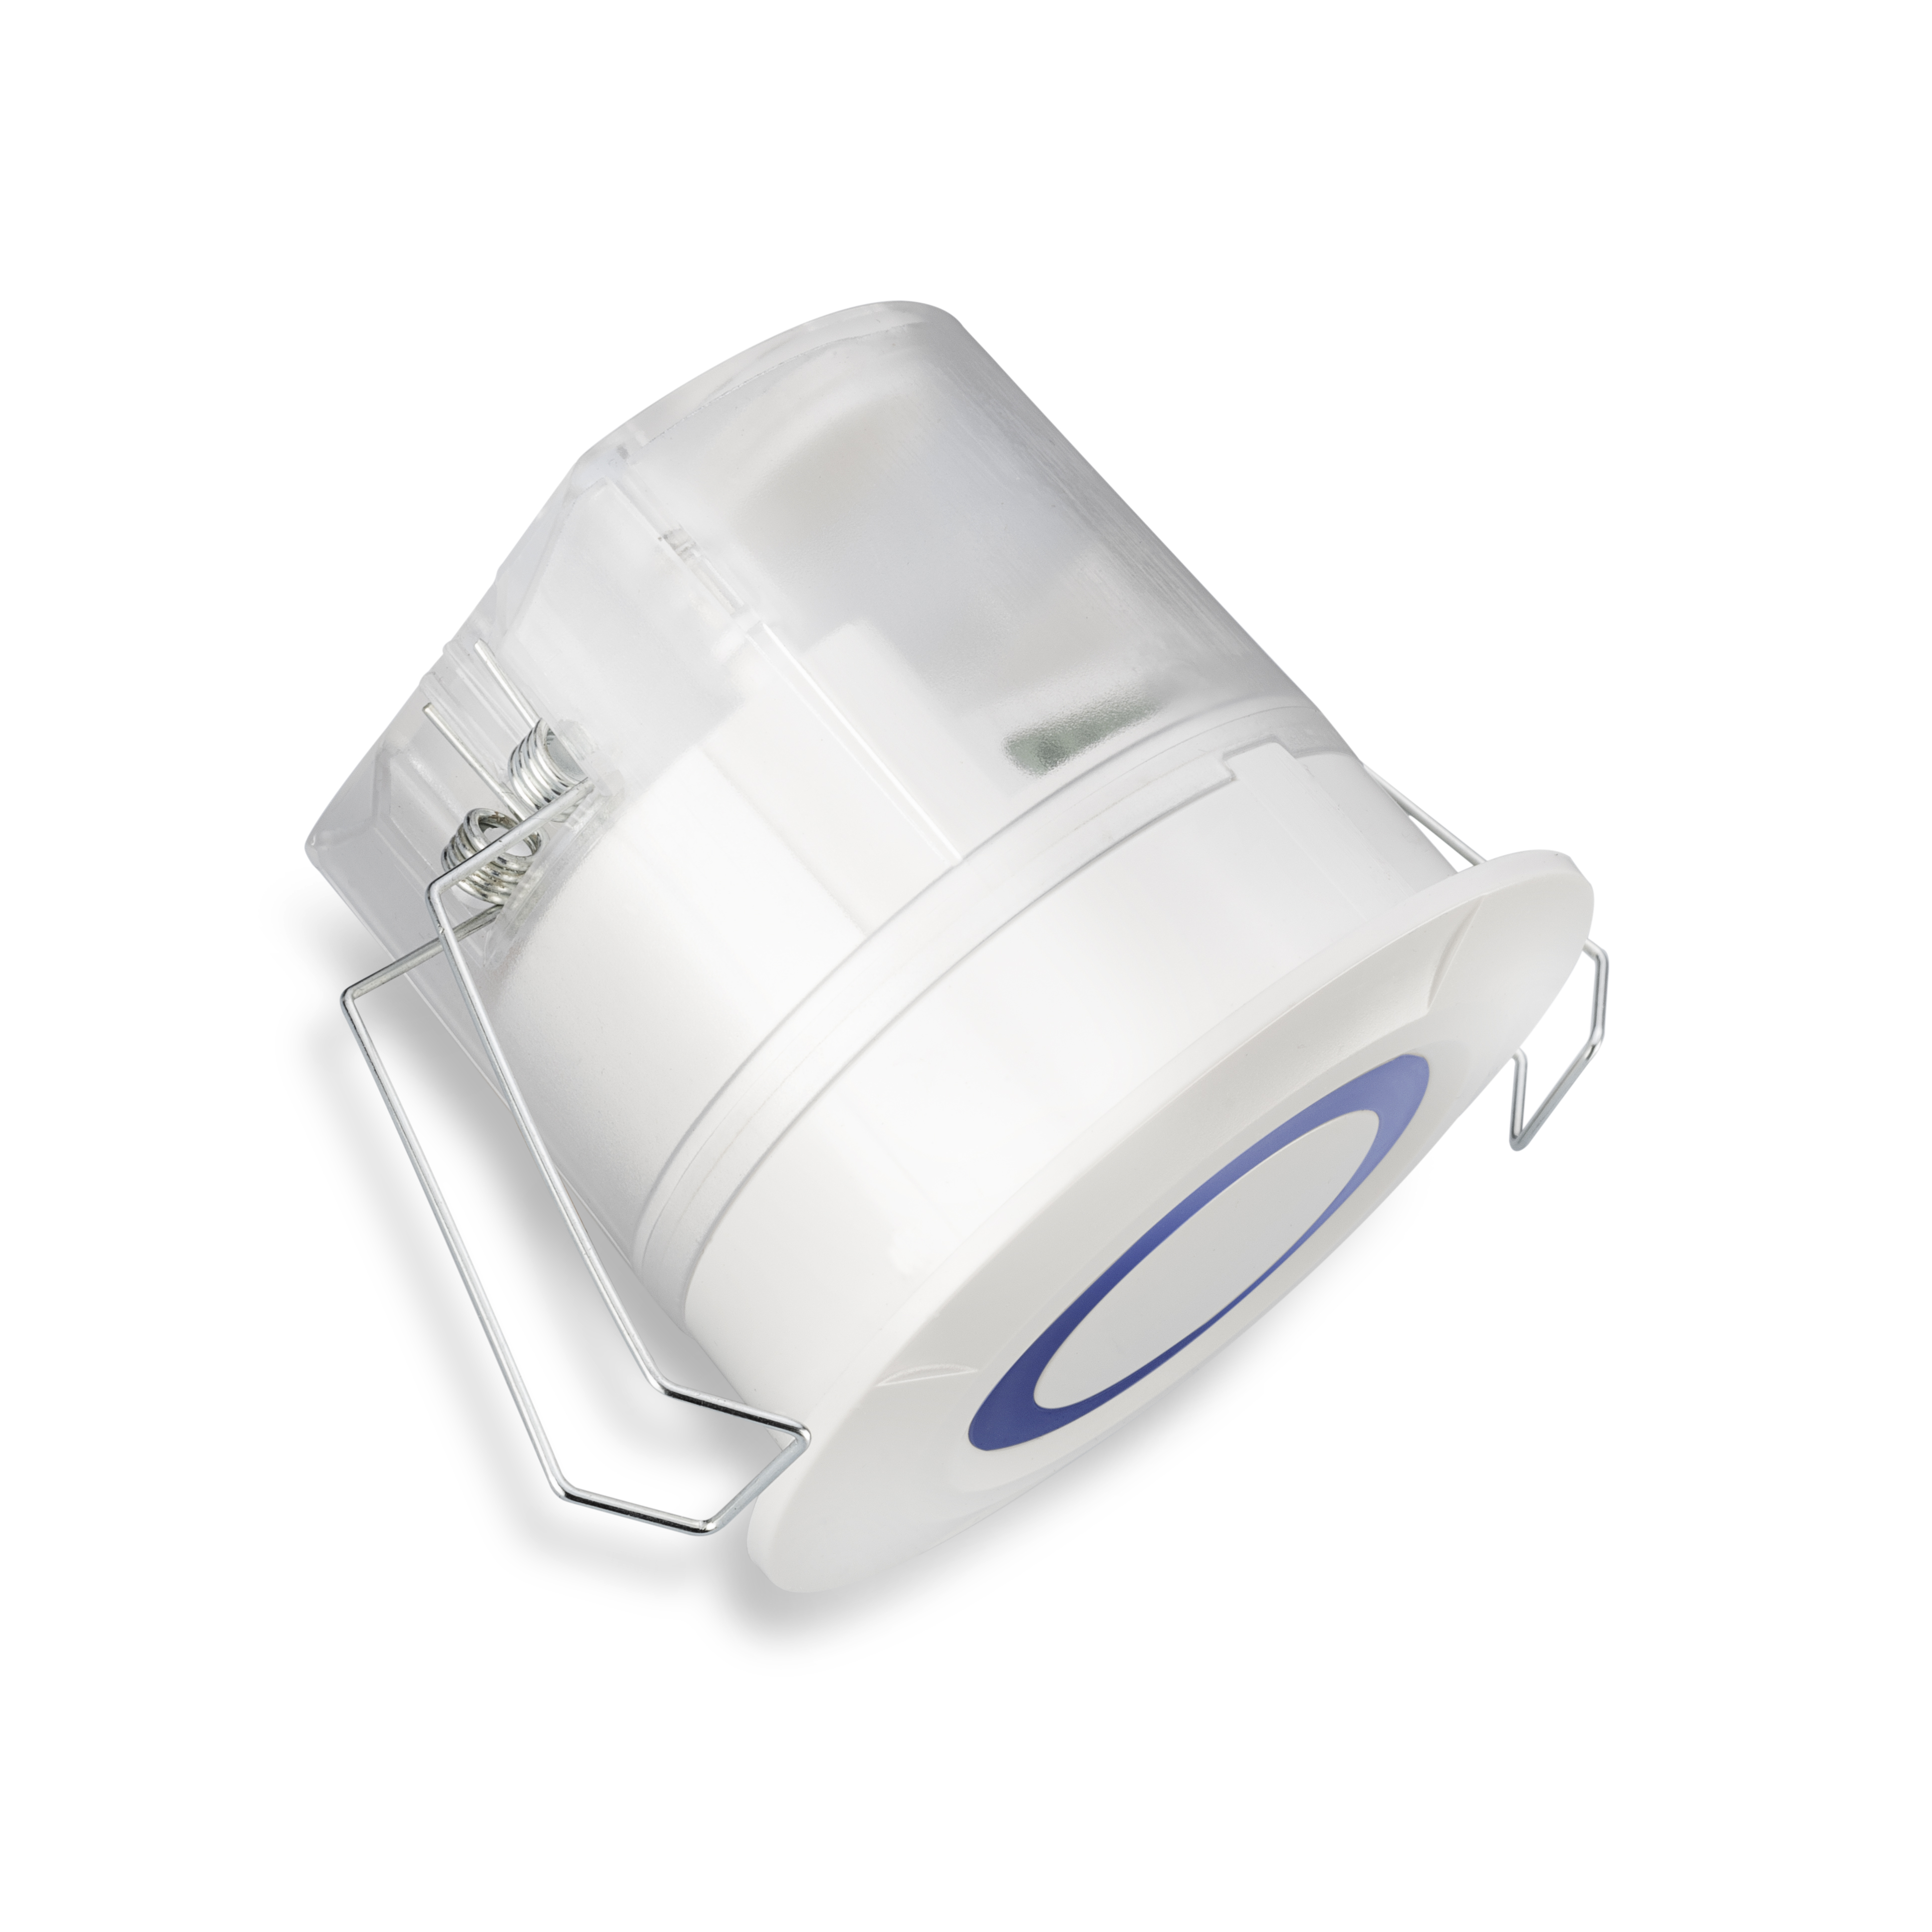 TALIS II P 360-10-2 HF high frequencys presence detector, flush mounting, 360 degrees, 10m diameter, 2 channels, IP54, 2000W